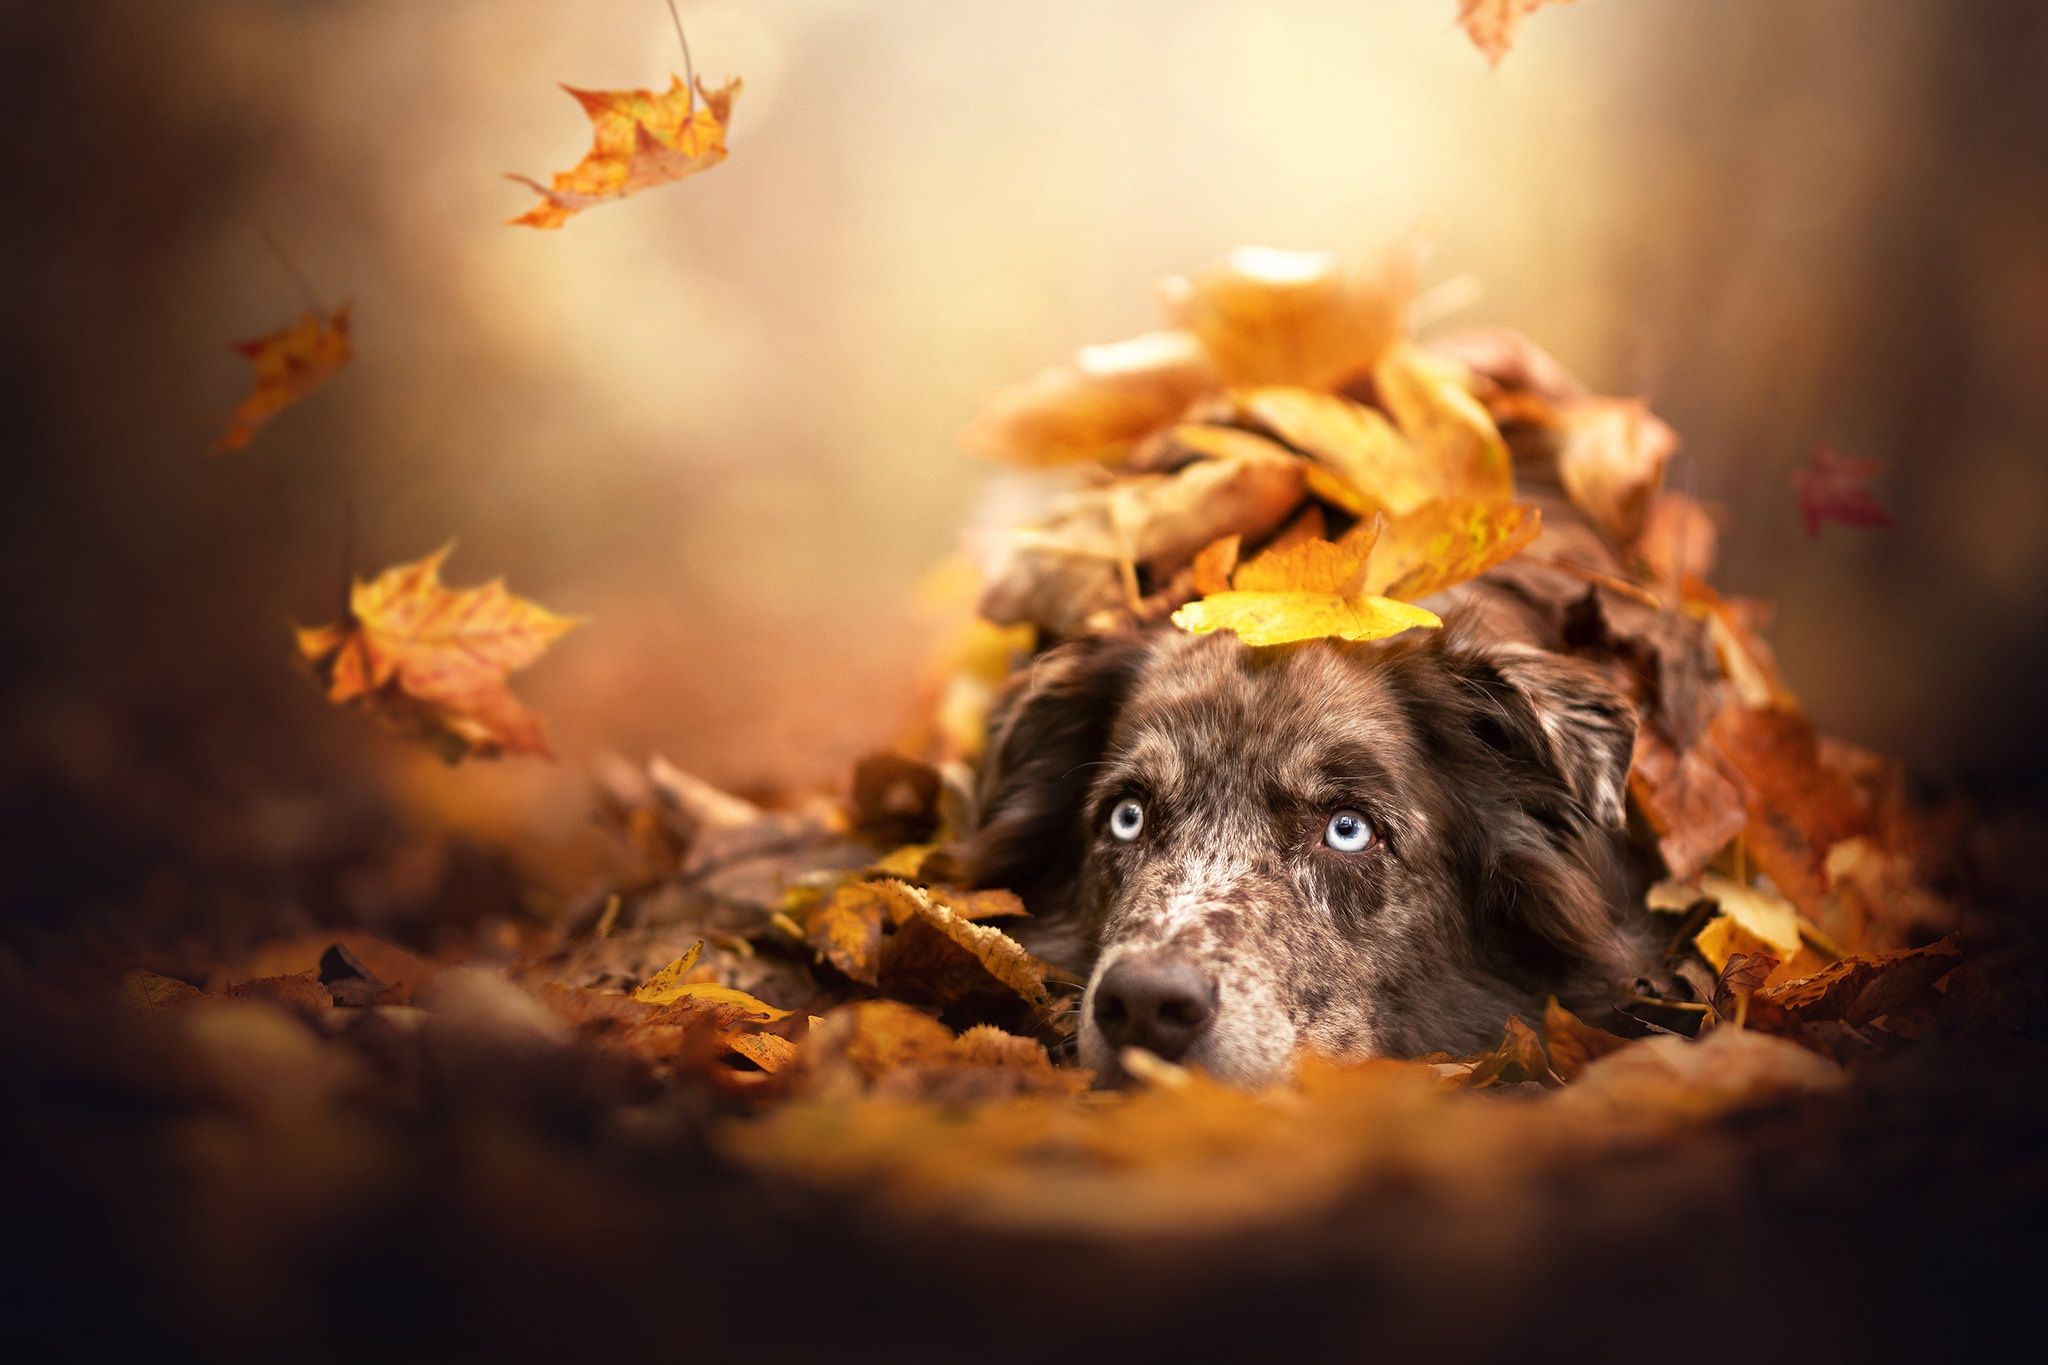  Fall  Dogs  Wallpapers  Wallpaper  Cave